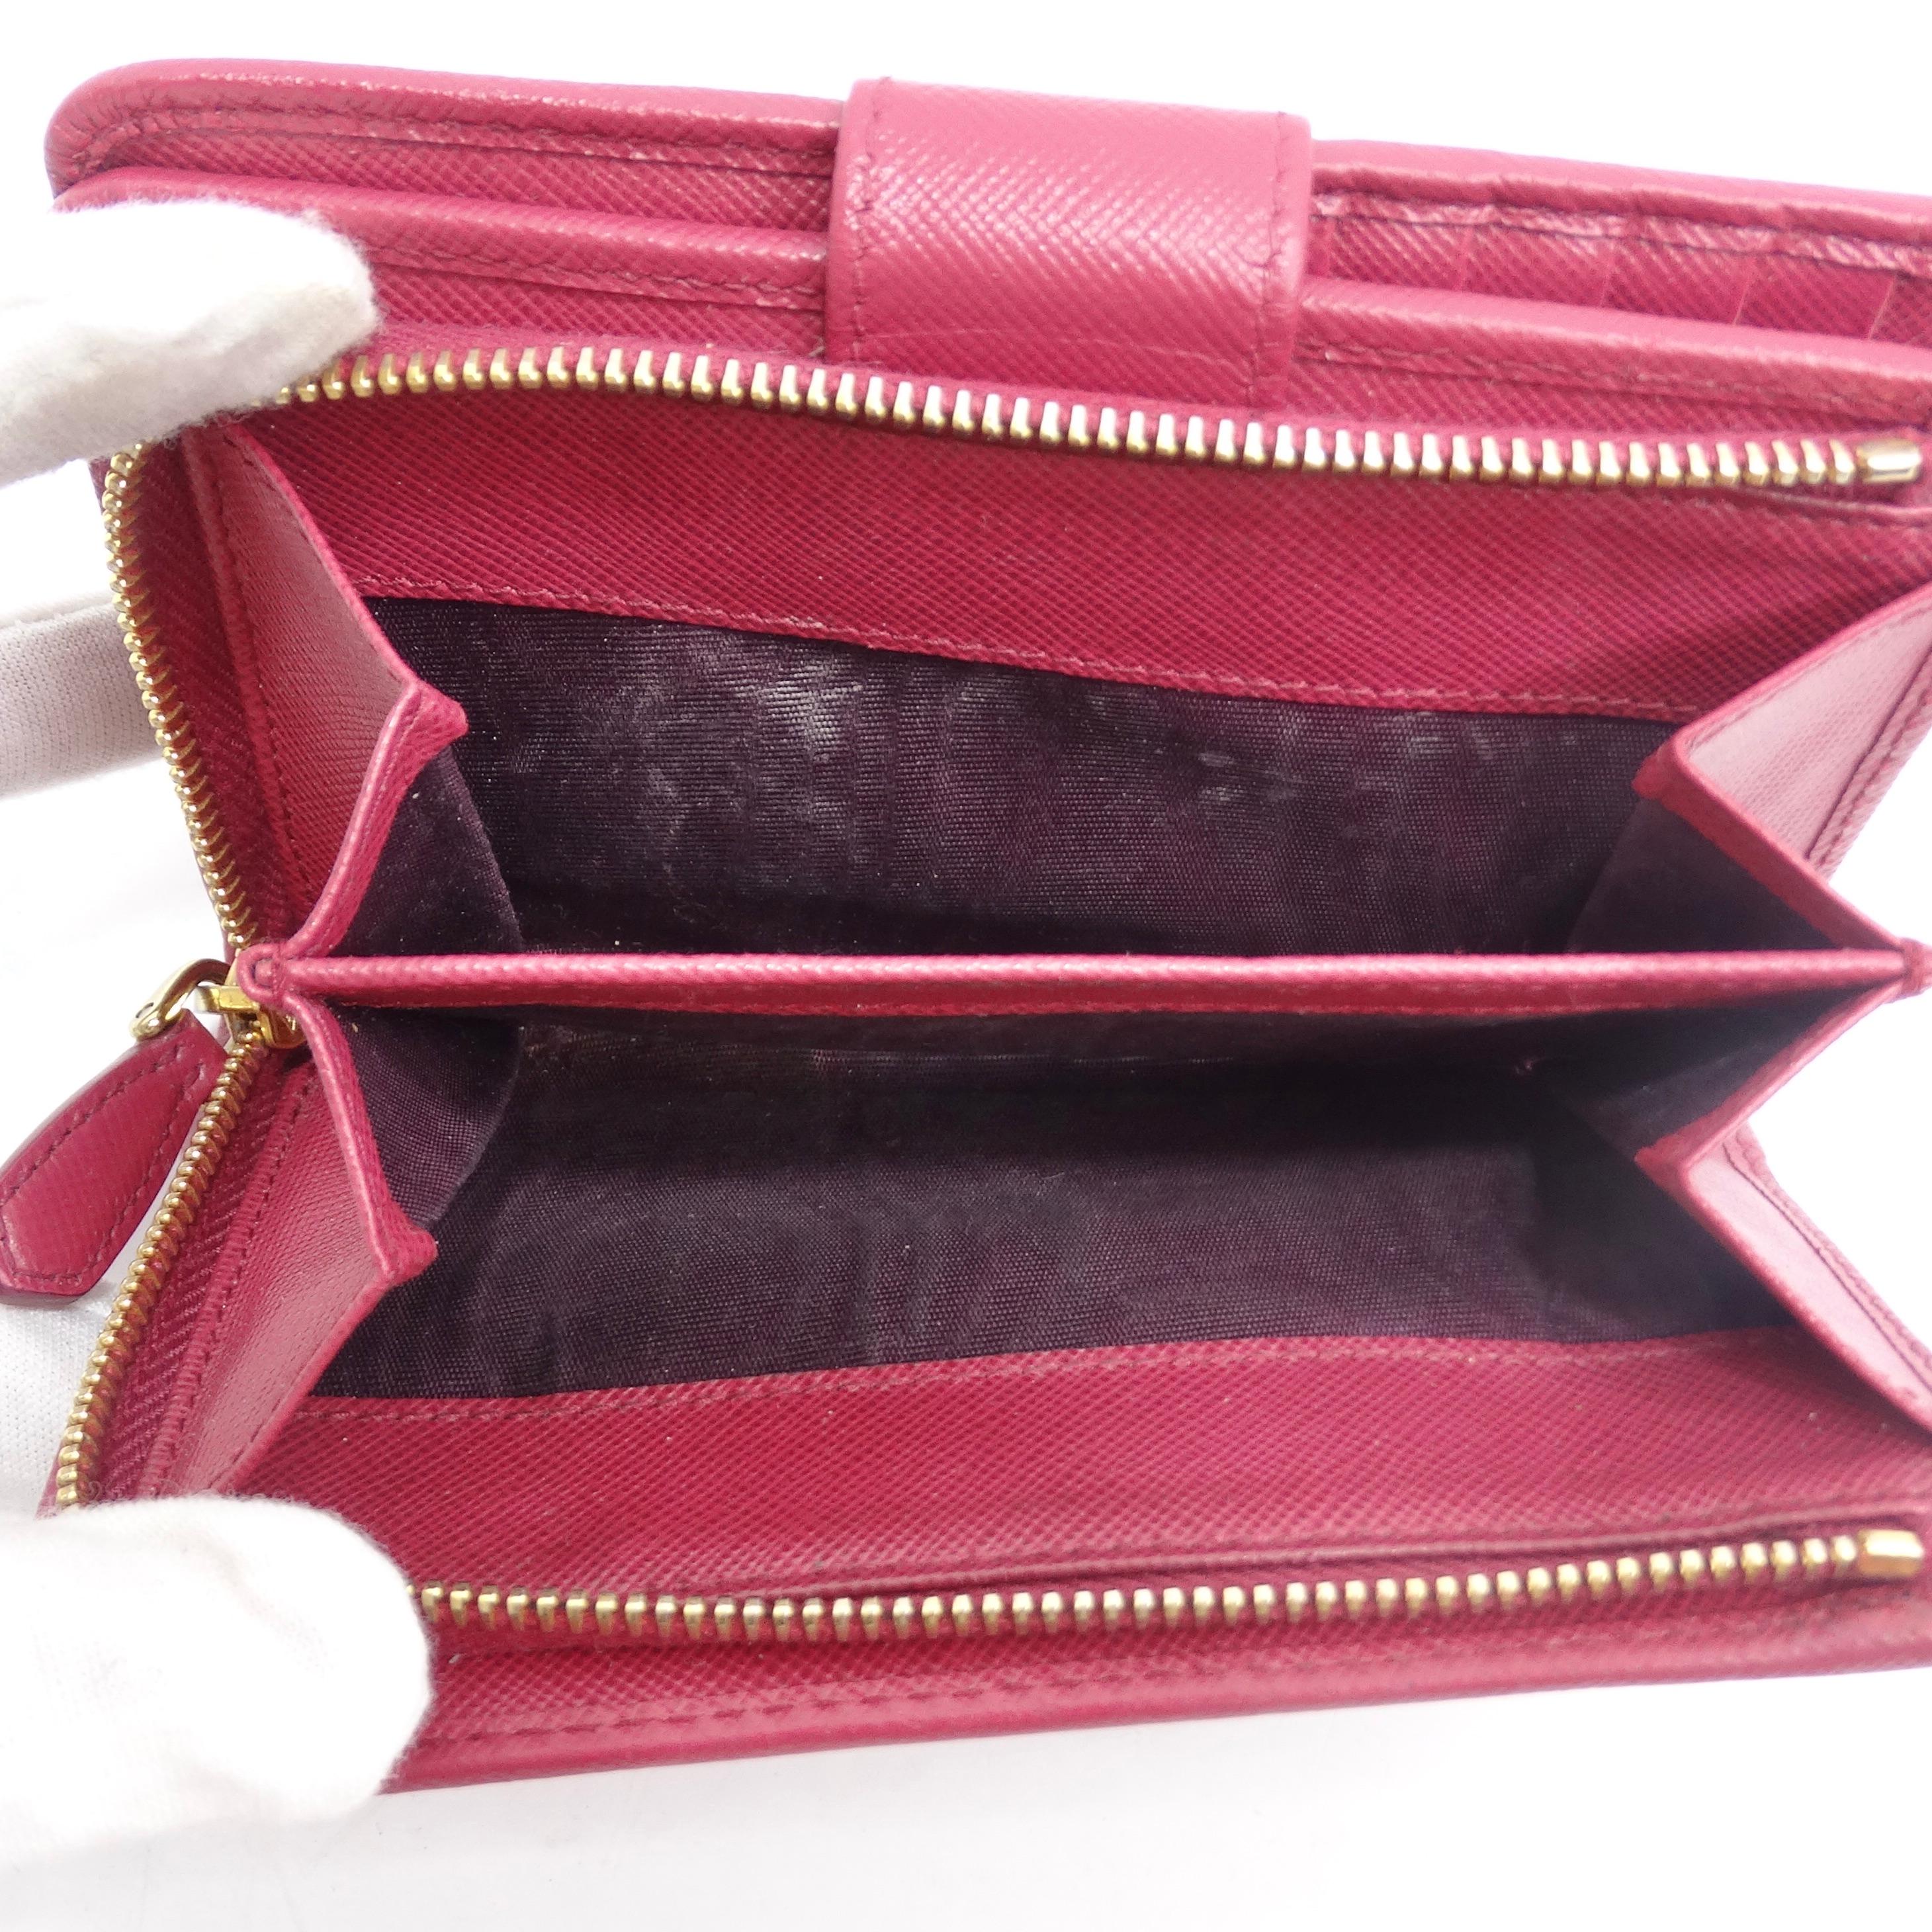 Prada Saffiano Leather Compact Wallet Pink For Sale 3